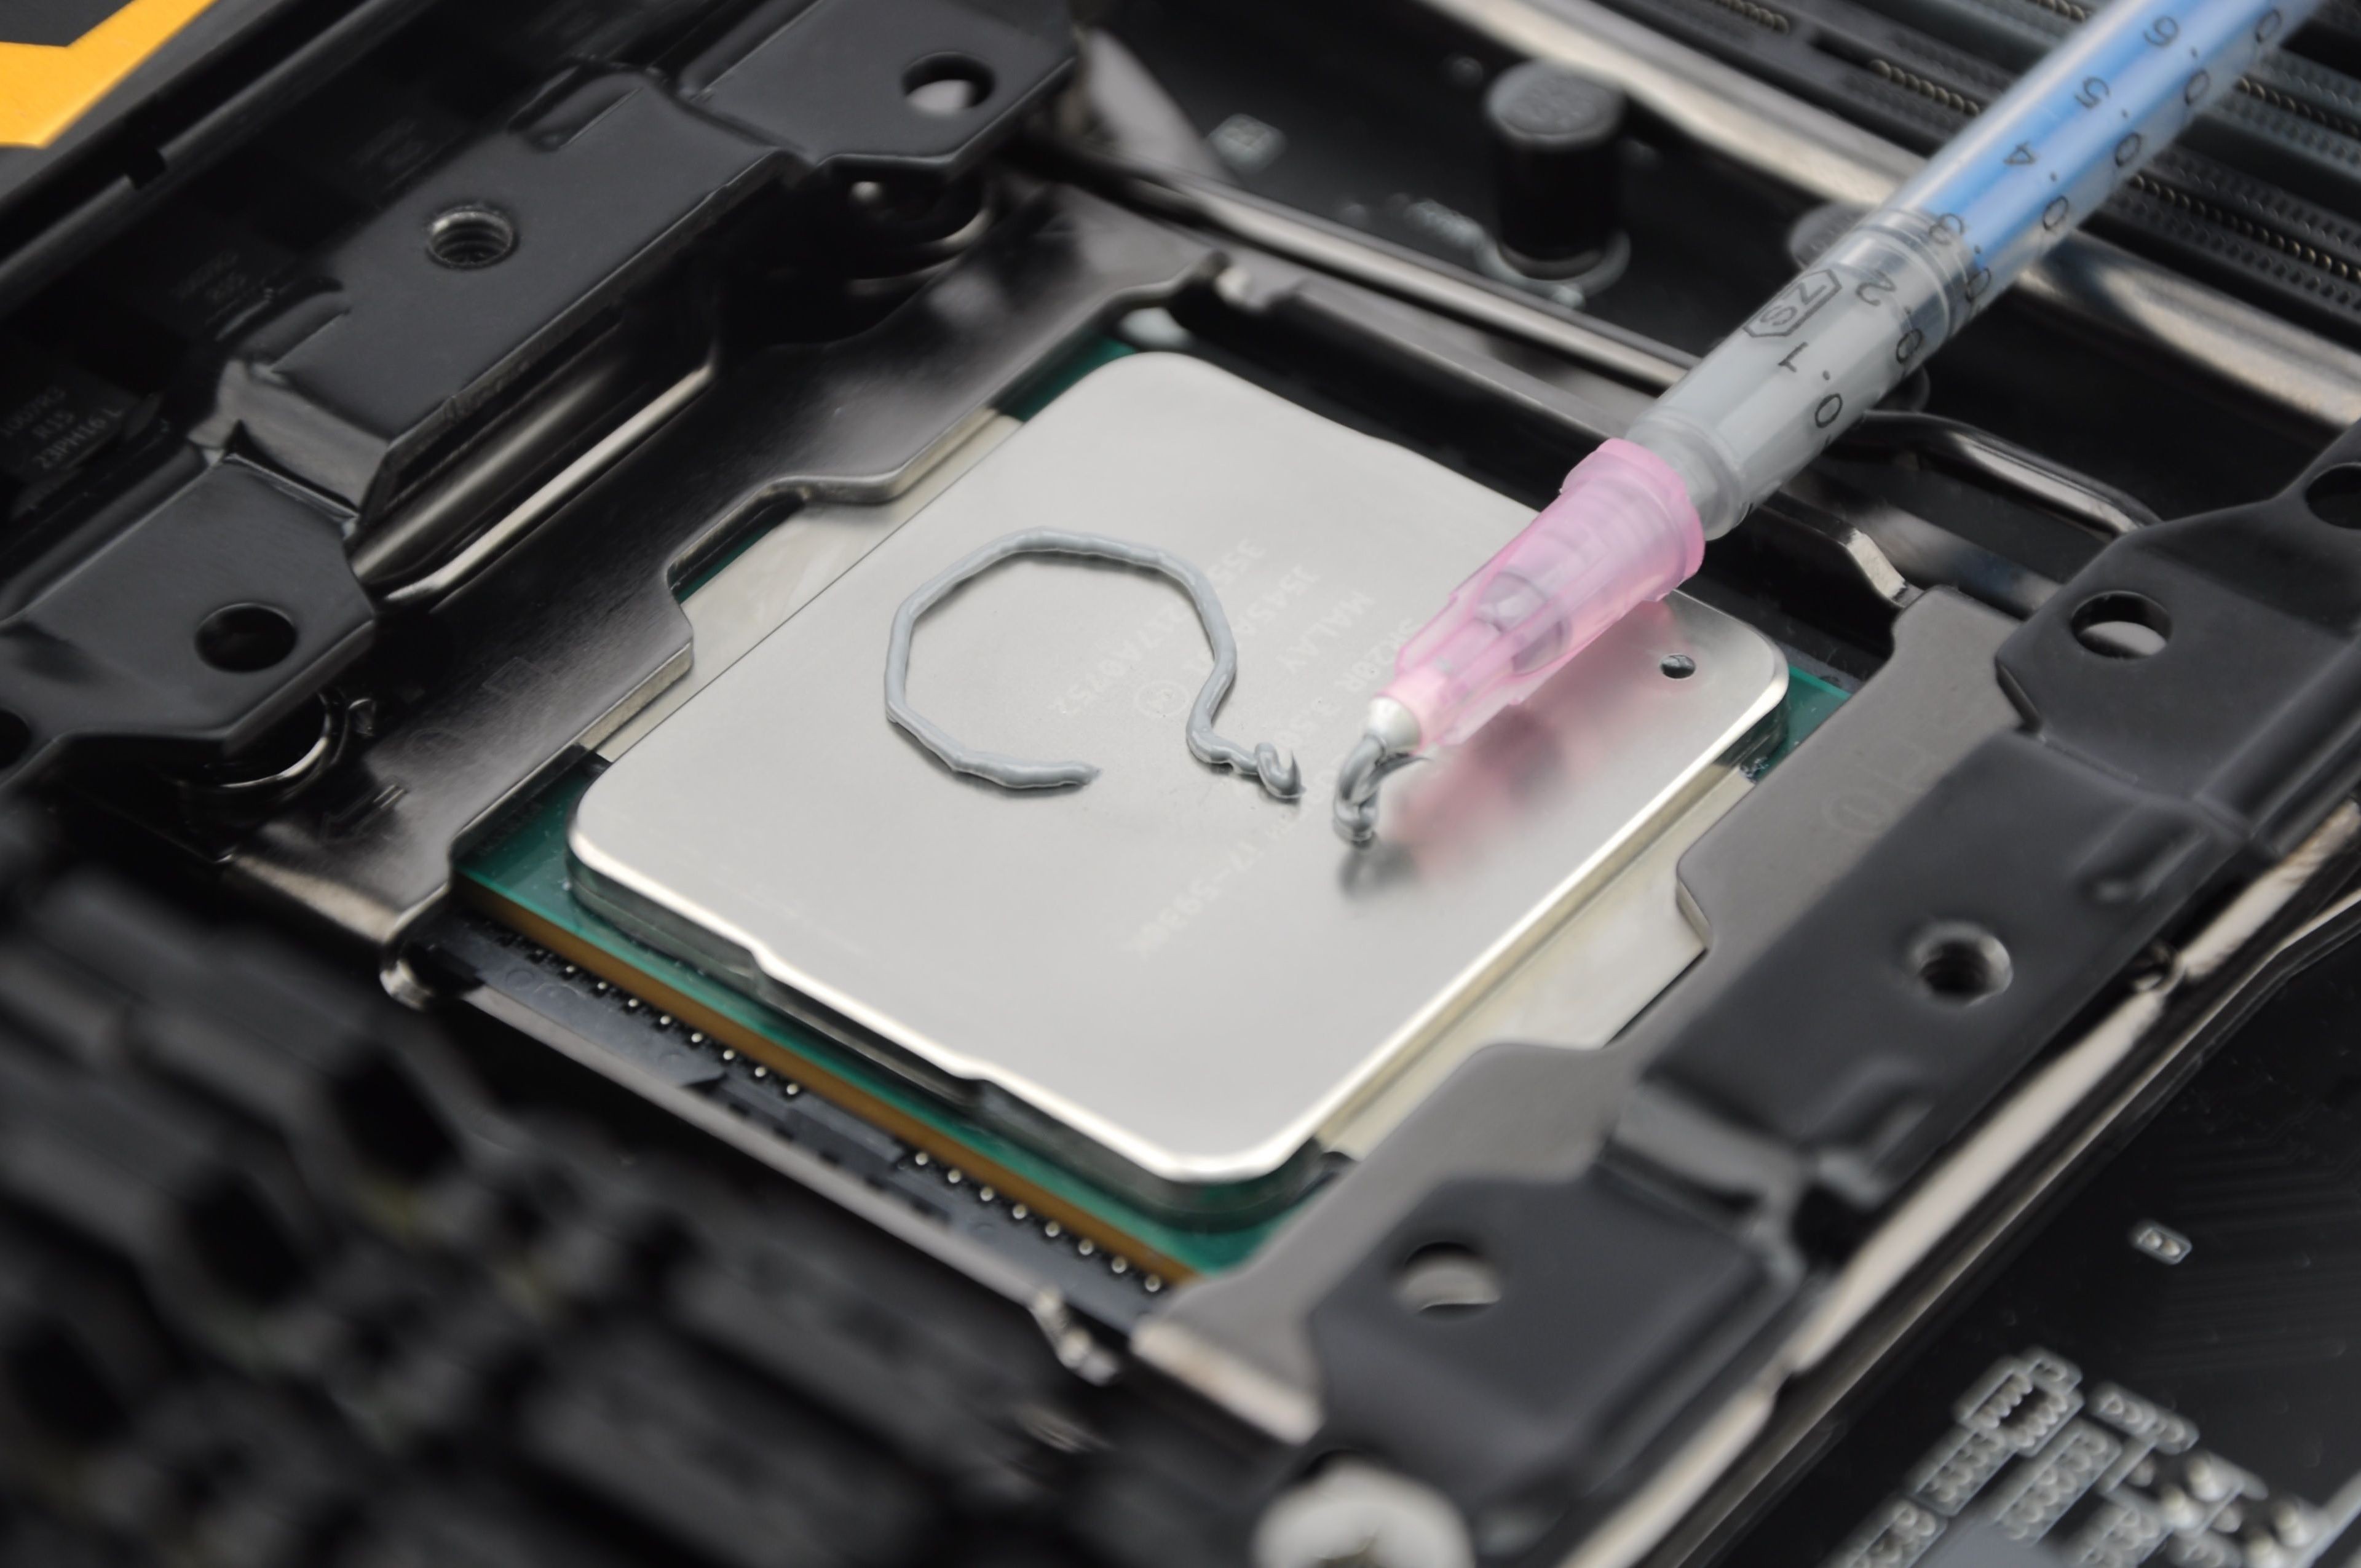 make sure to apply the thermal paste correctly on PS4 CPU surface